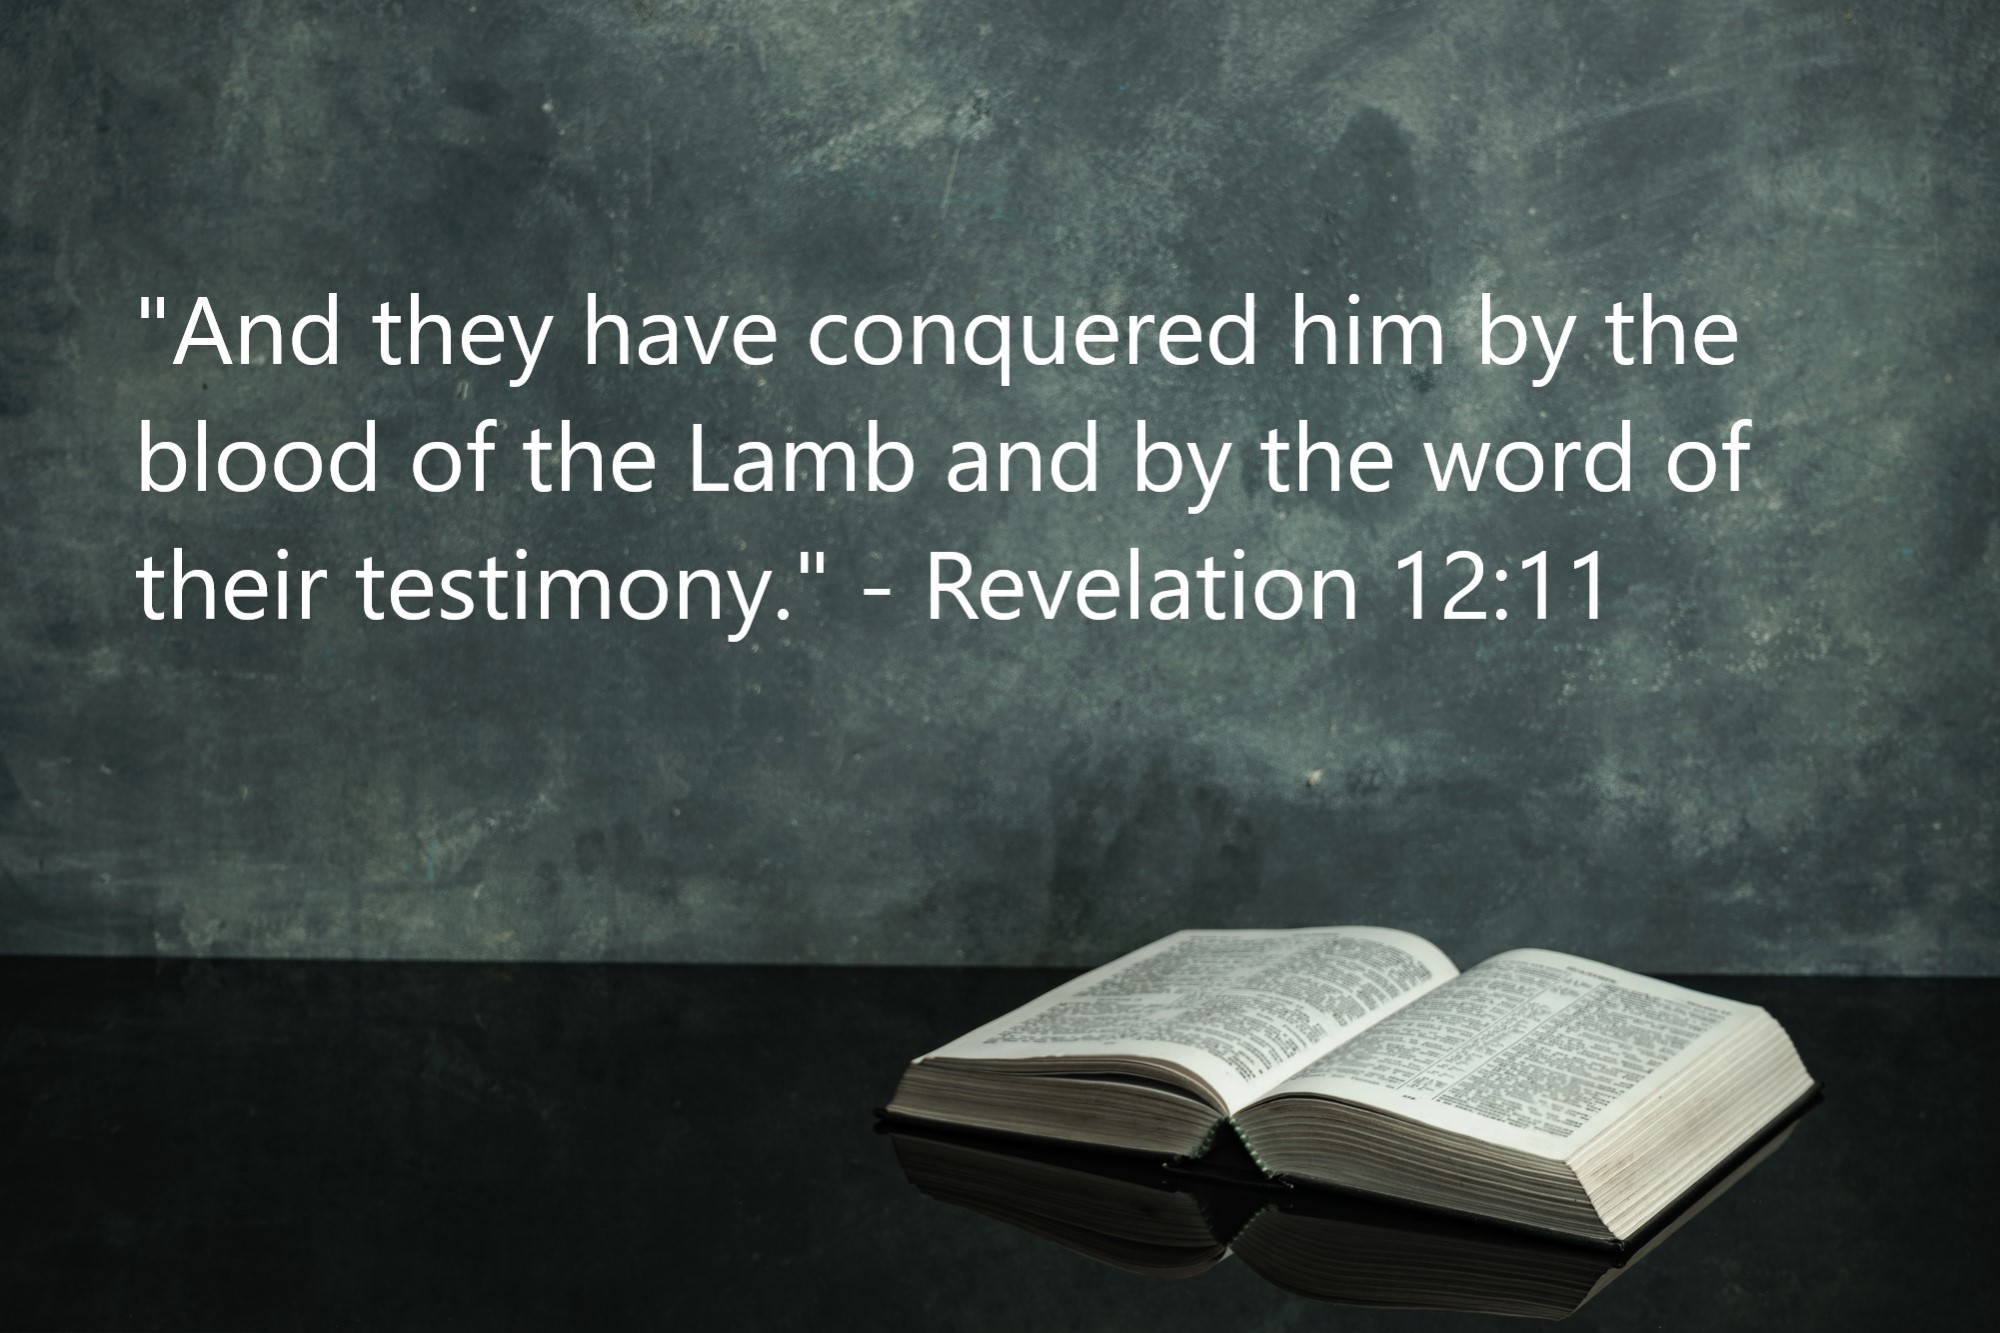 "And they have conquered him by the blood of the Lamb and by the word of their testimony." - Revelation 12:11